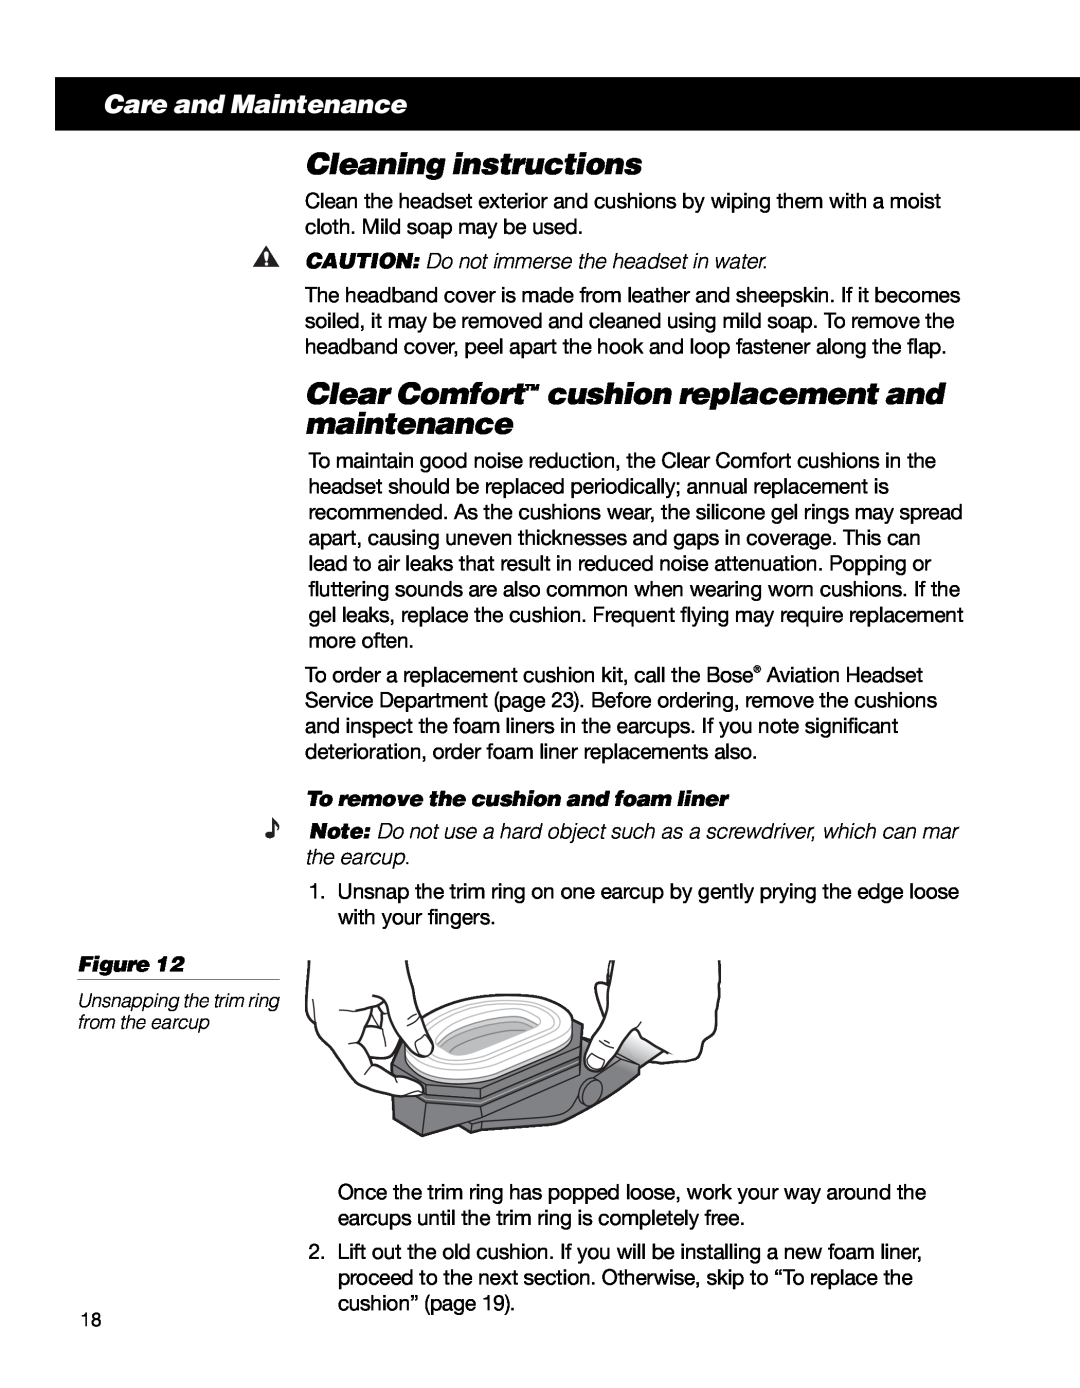 Bose II manual Cleaning instructions, Care and Maintenance, CAUTION Do not immerse the headset in water 